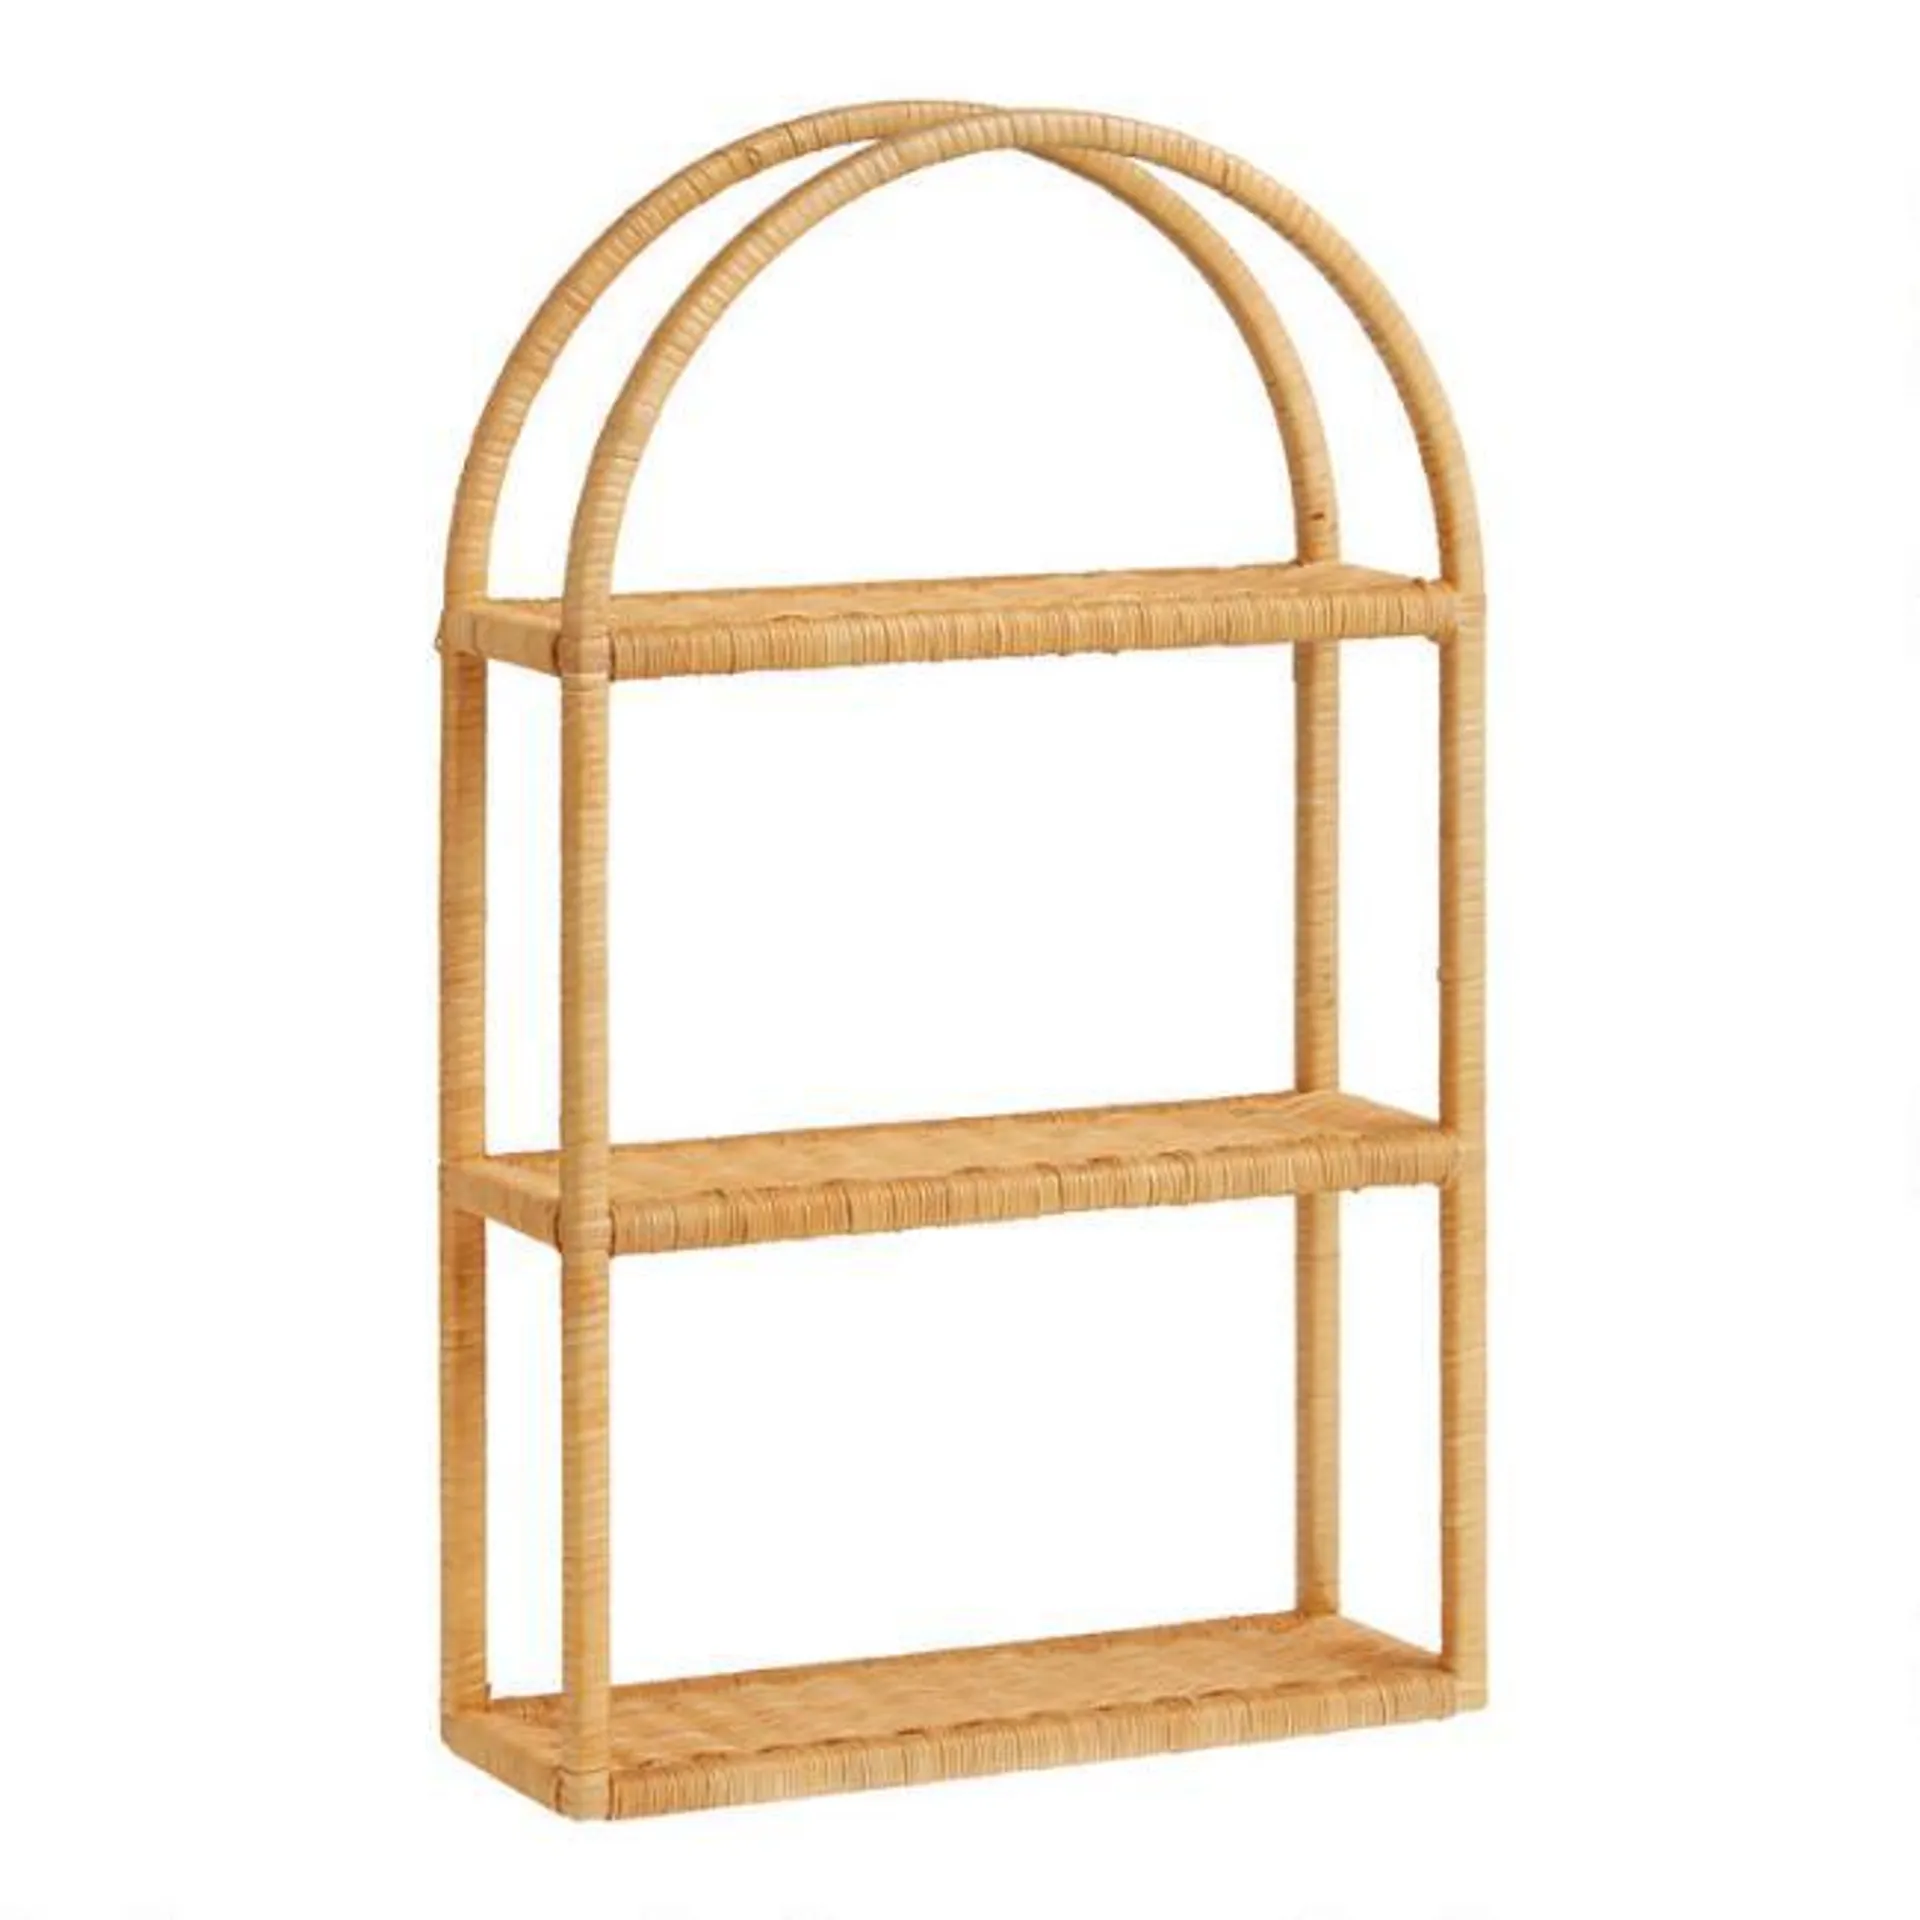 Wrapped Rattan Arched 3 Tier Wall Shelf